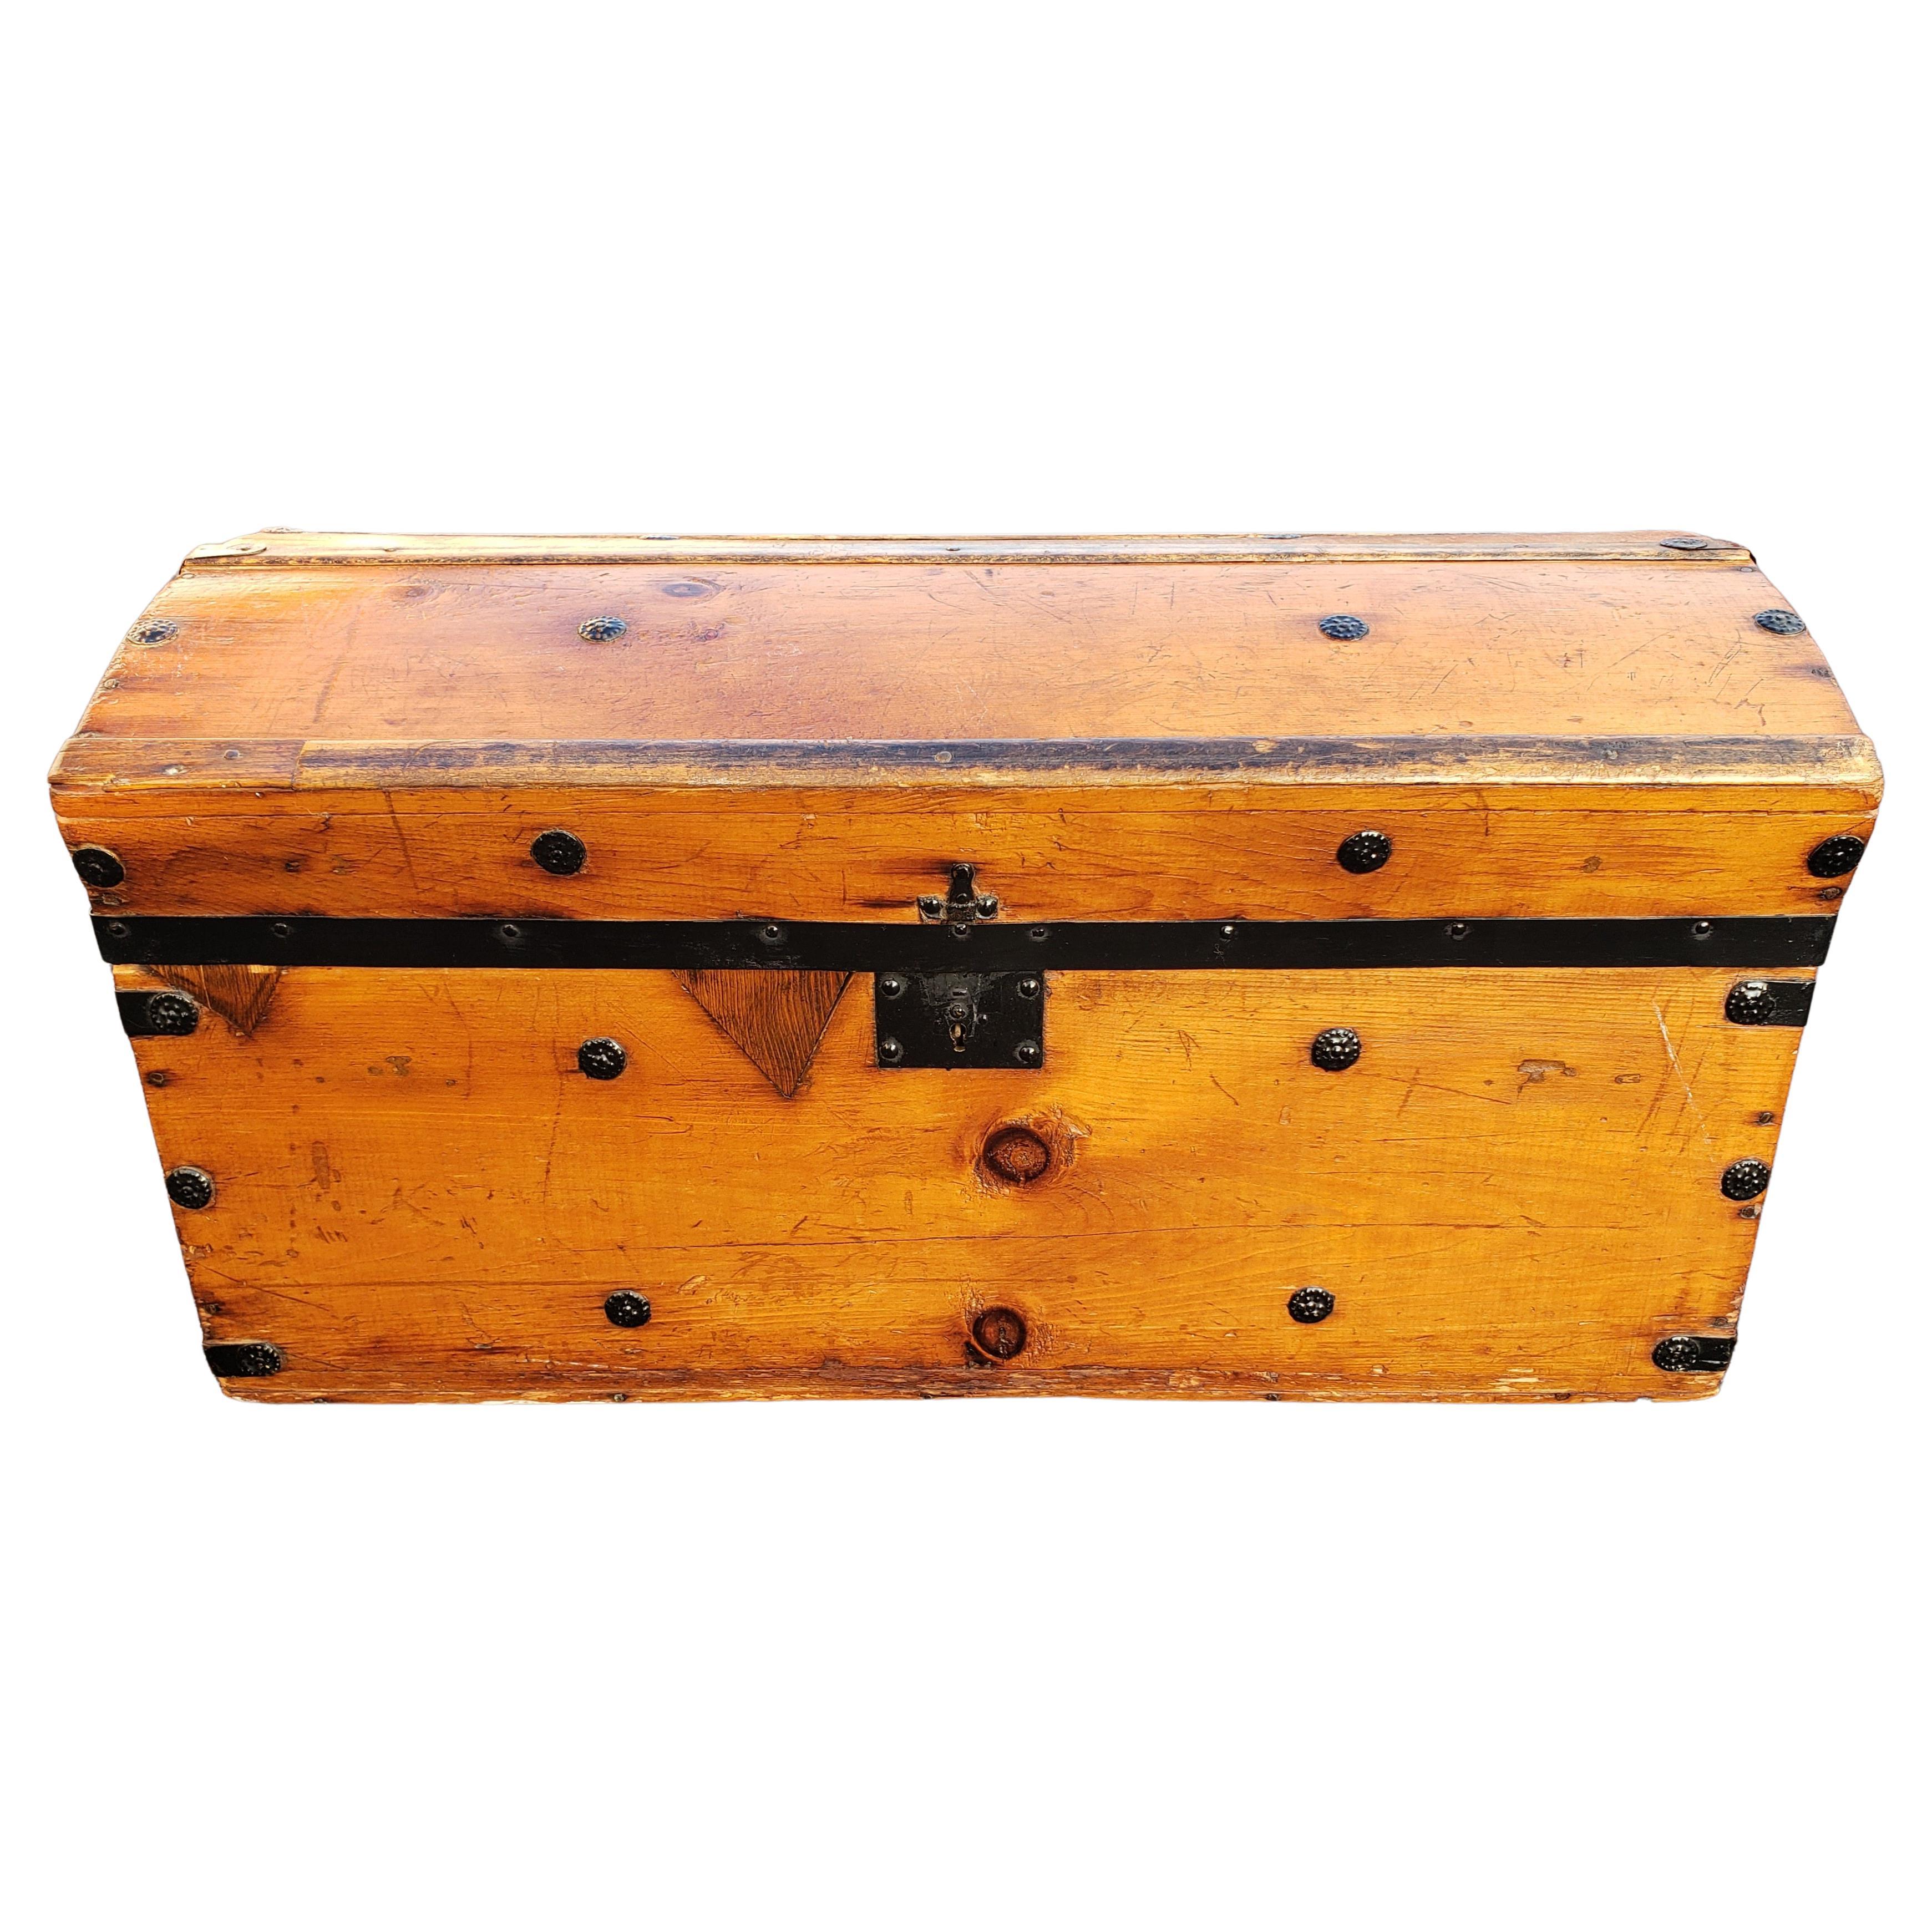 Metal Vintage American Pine Trunk with Solid Wooden Handles, circa 1960s For Sale